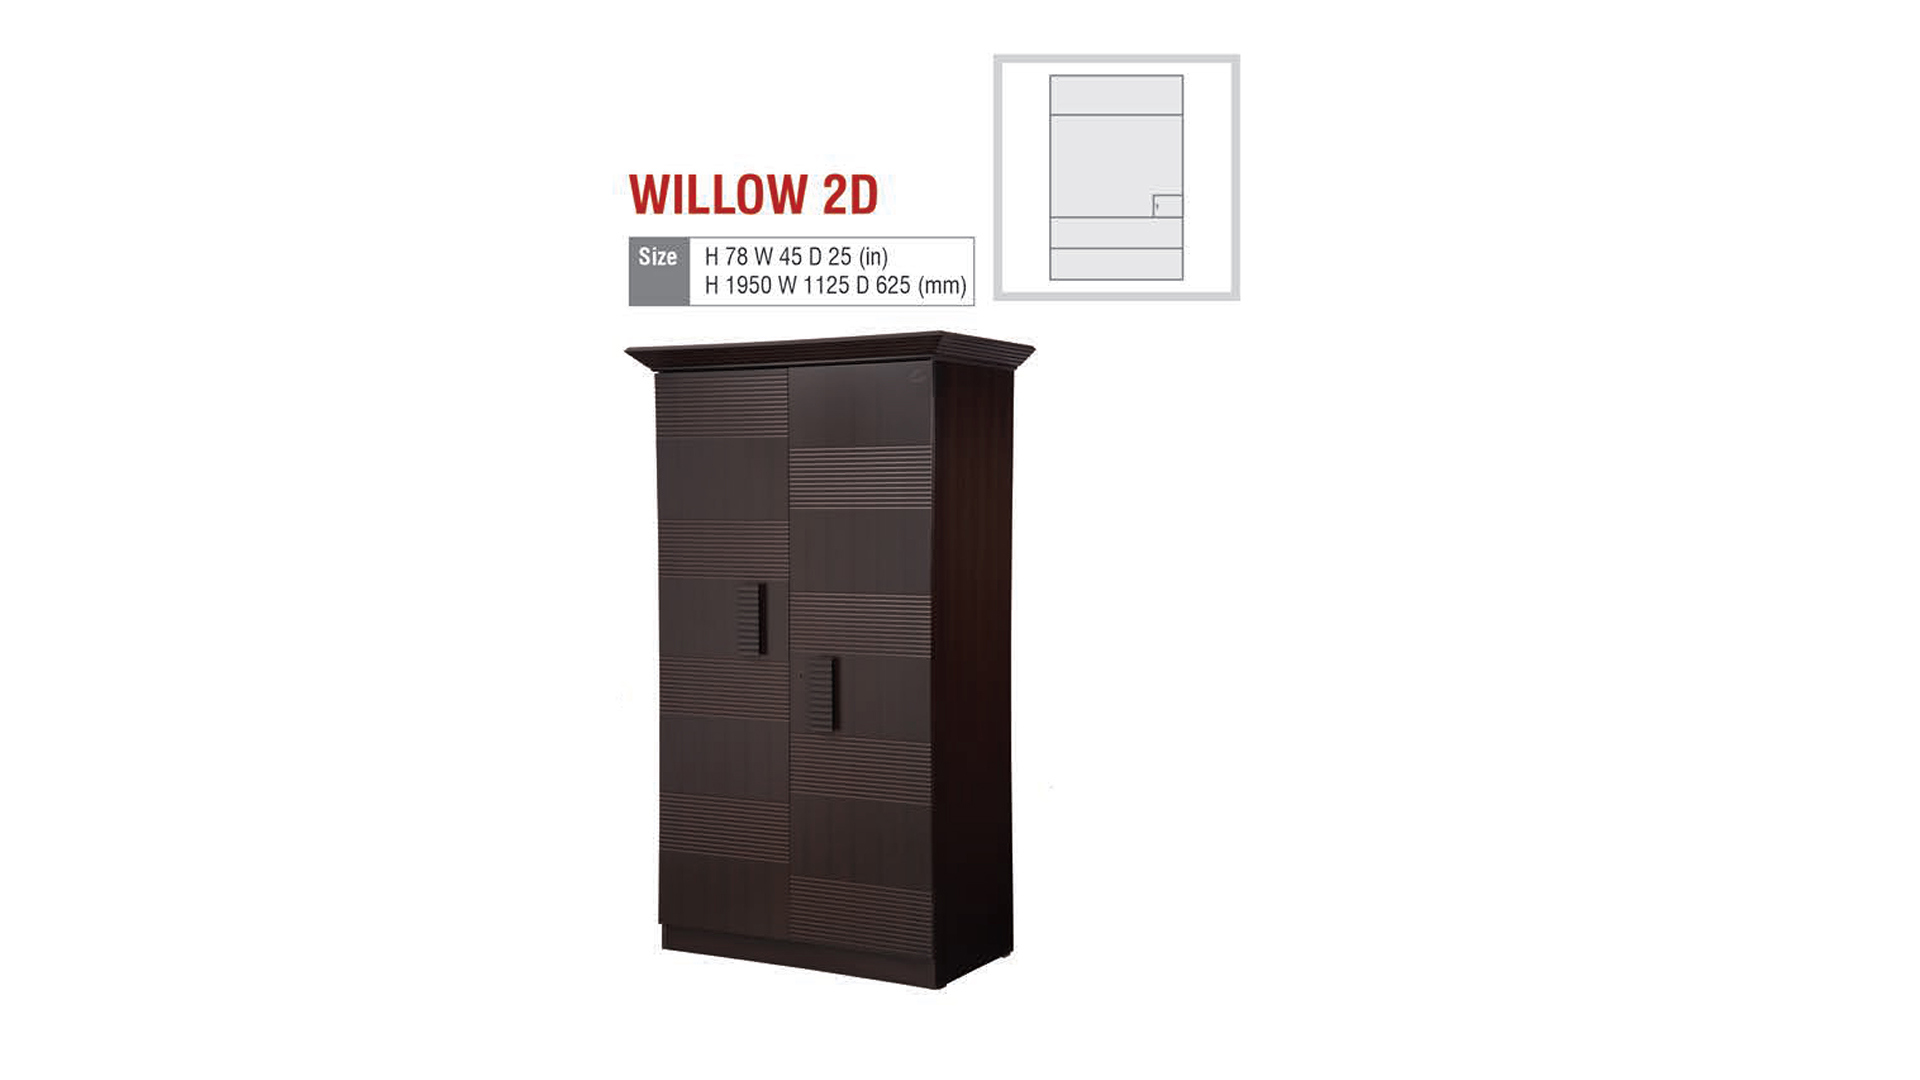 WILLOW 2D